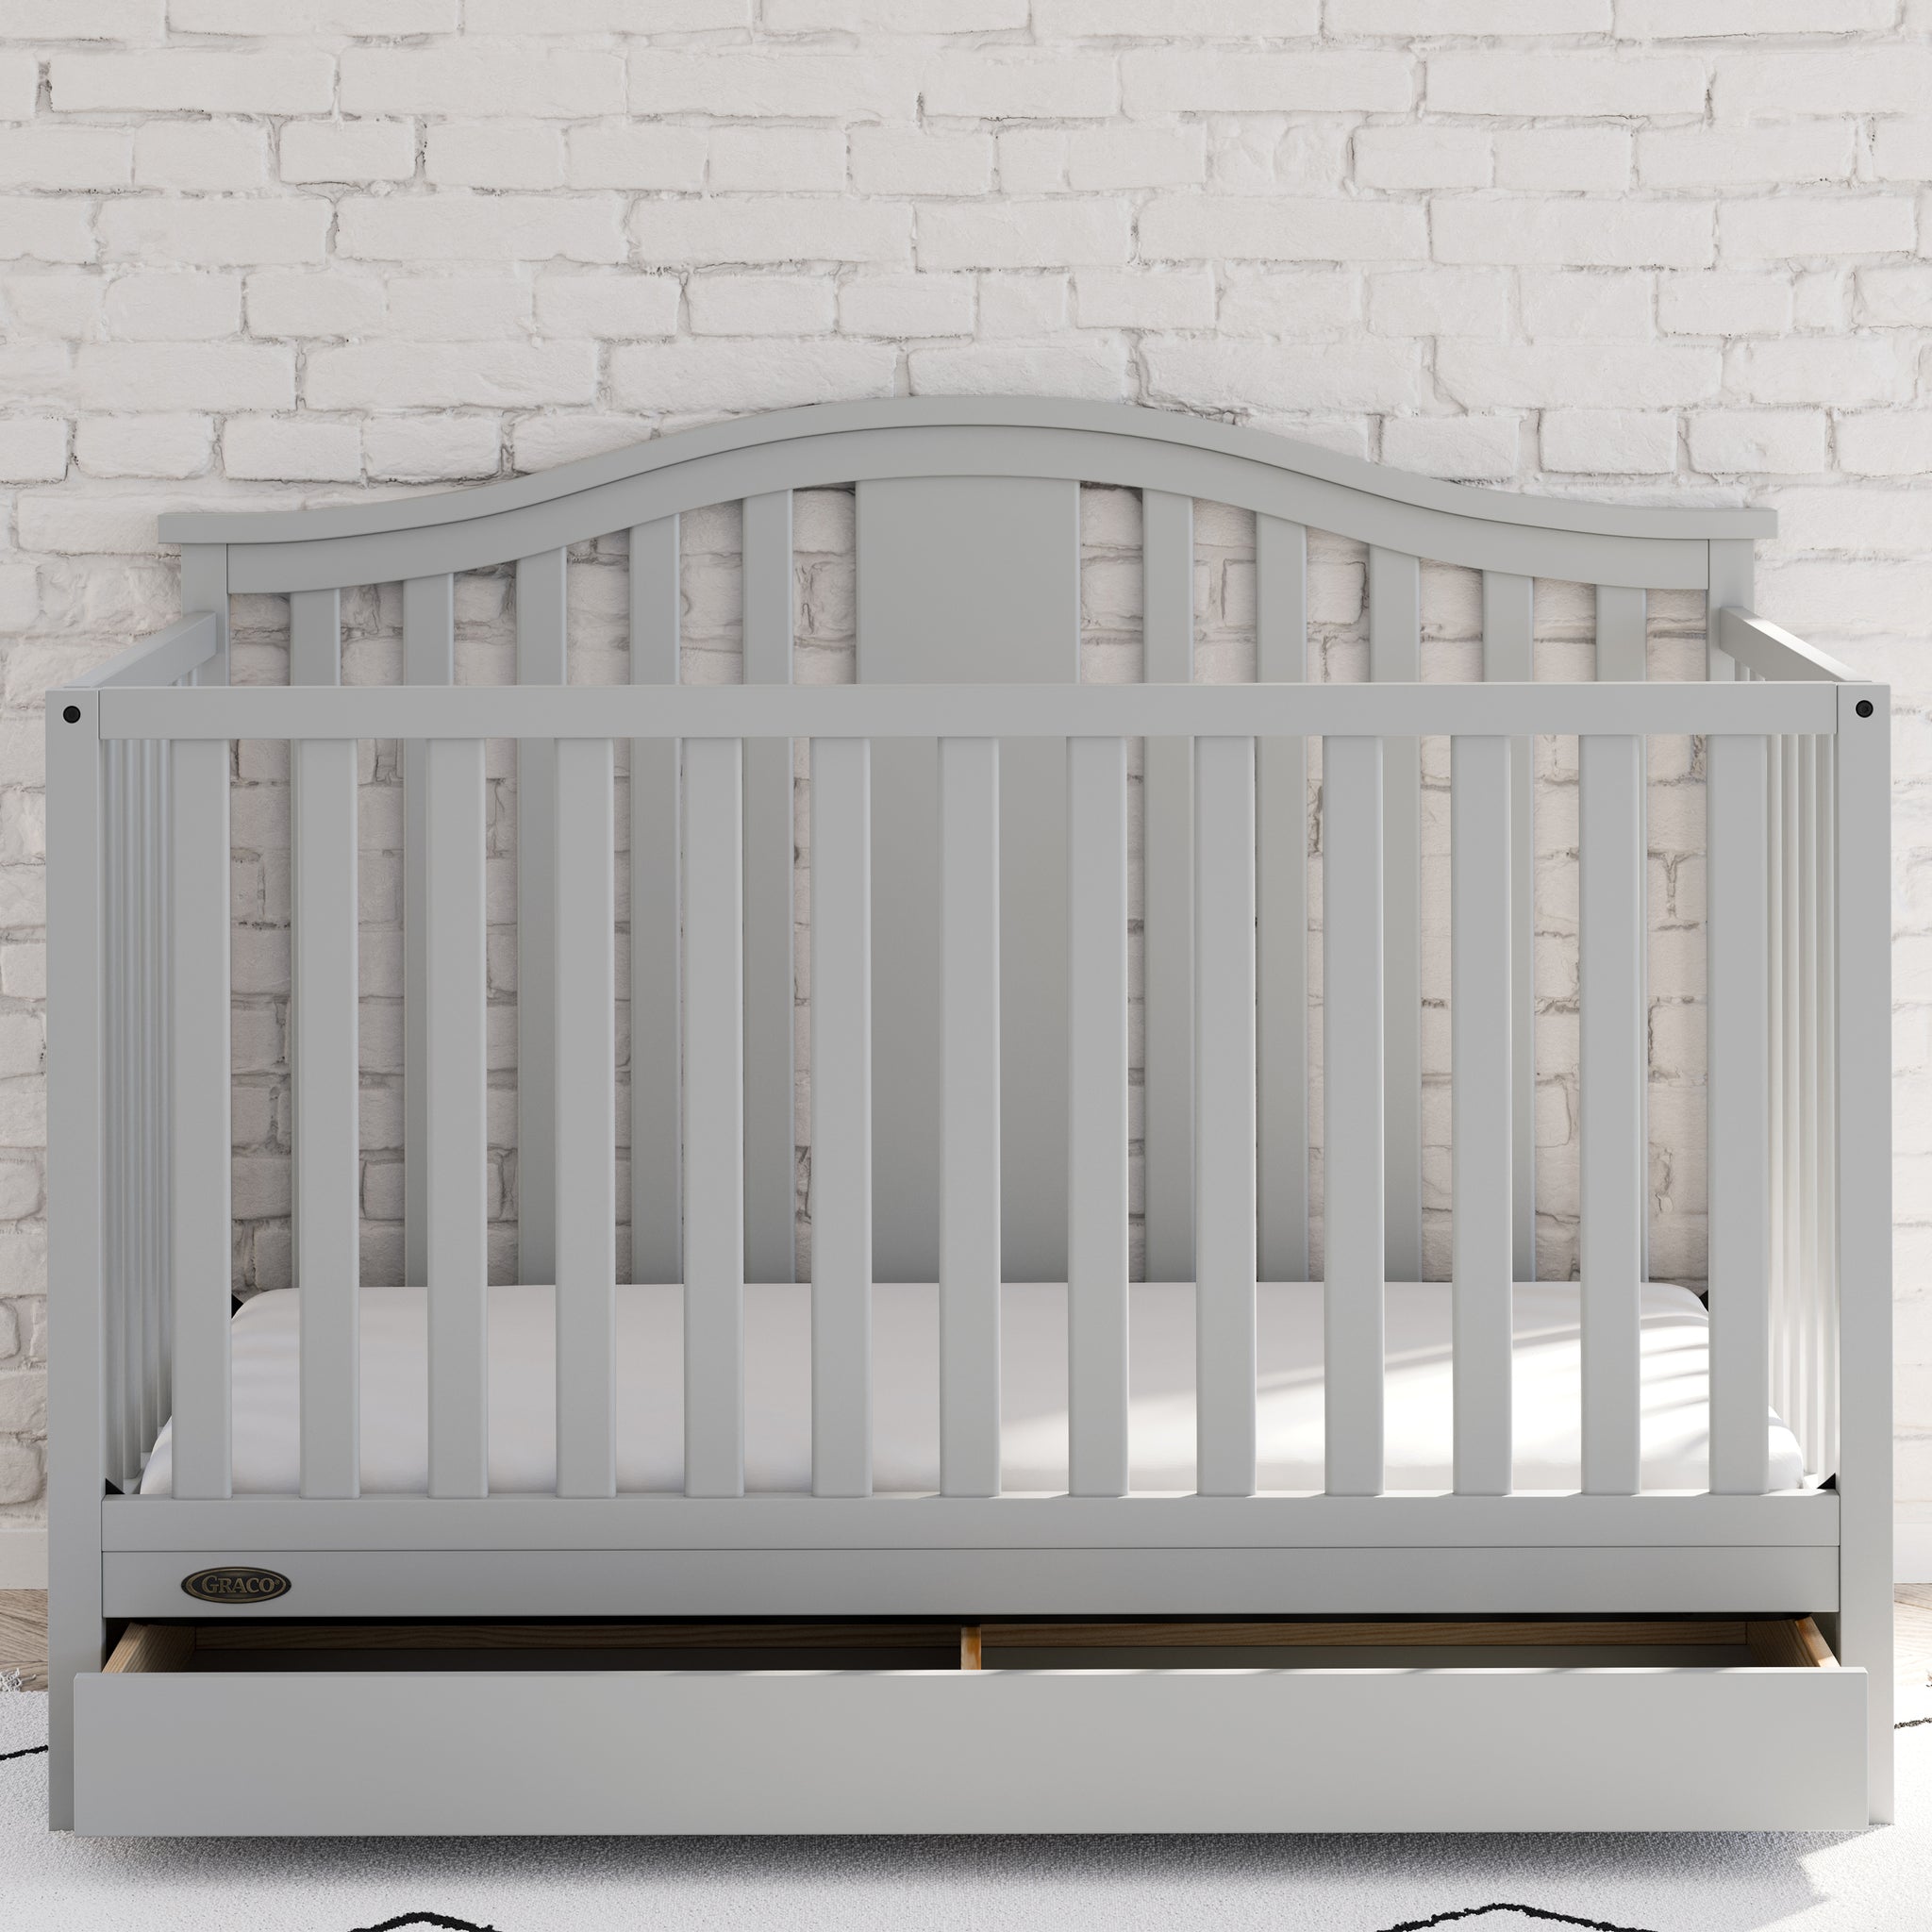 Pebble gray crib with drawer in nursery